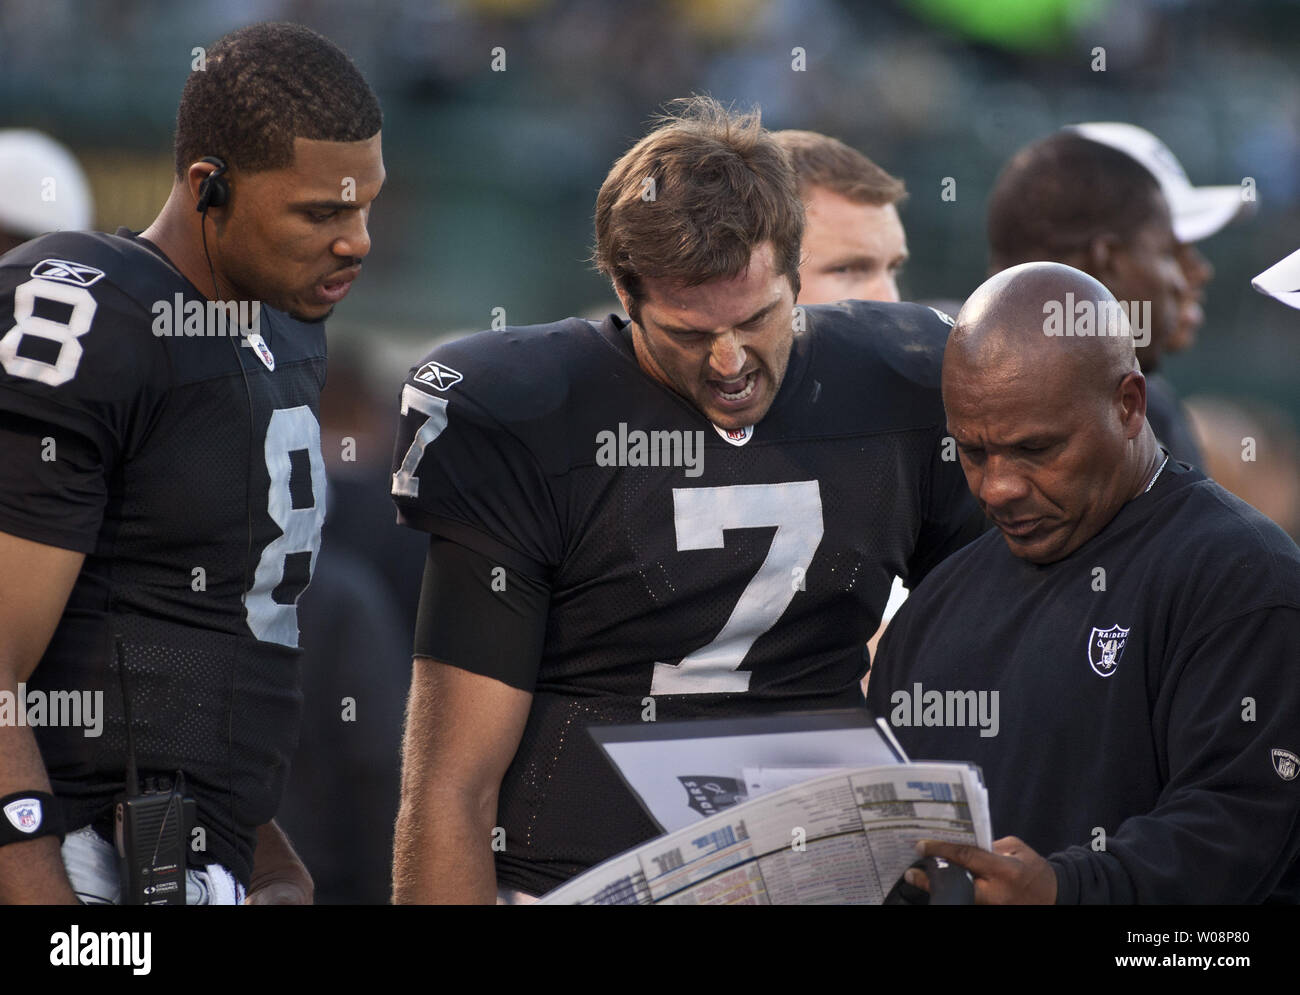 Oakland Raiders Head Coach Hue Jackson (R) goes over the play list with quarterbacks Jason Campbell (8) and Kyle Boller (7) on the  sidelines  against the New Orleans Saints at the Coliseum in Oakland, California on August 28, 2011.   UPI/Terry Schmitt Stock Photo